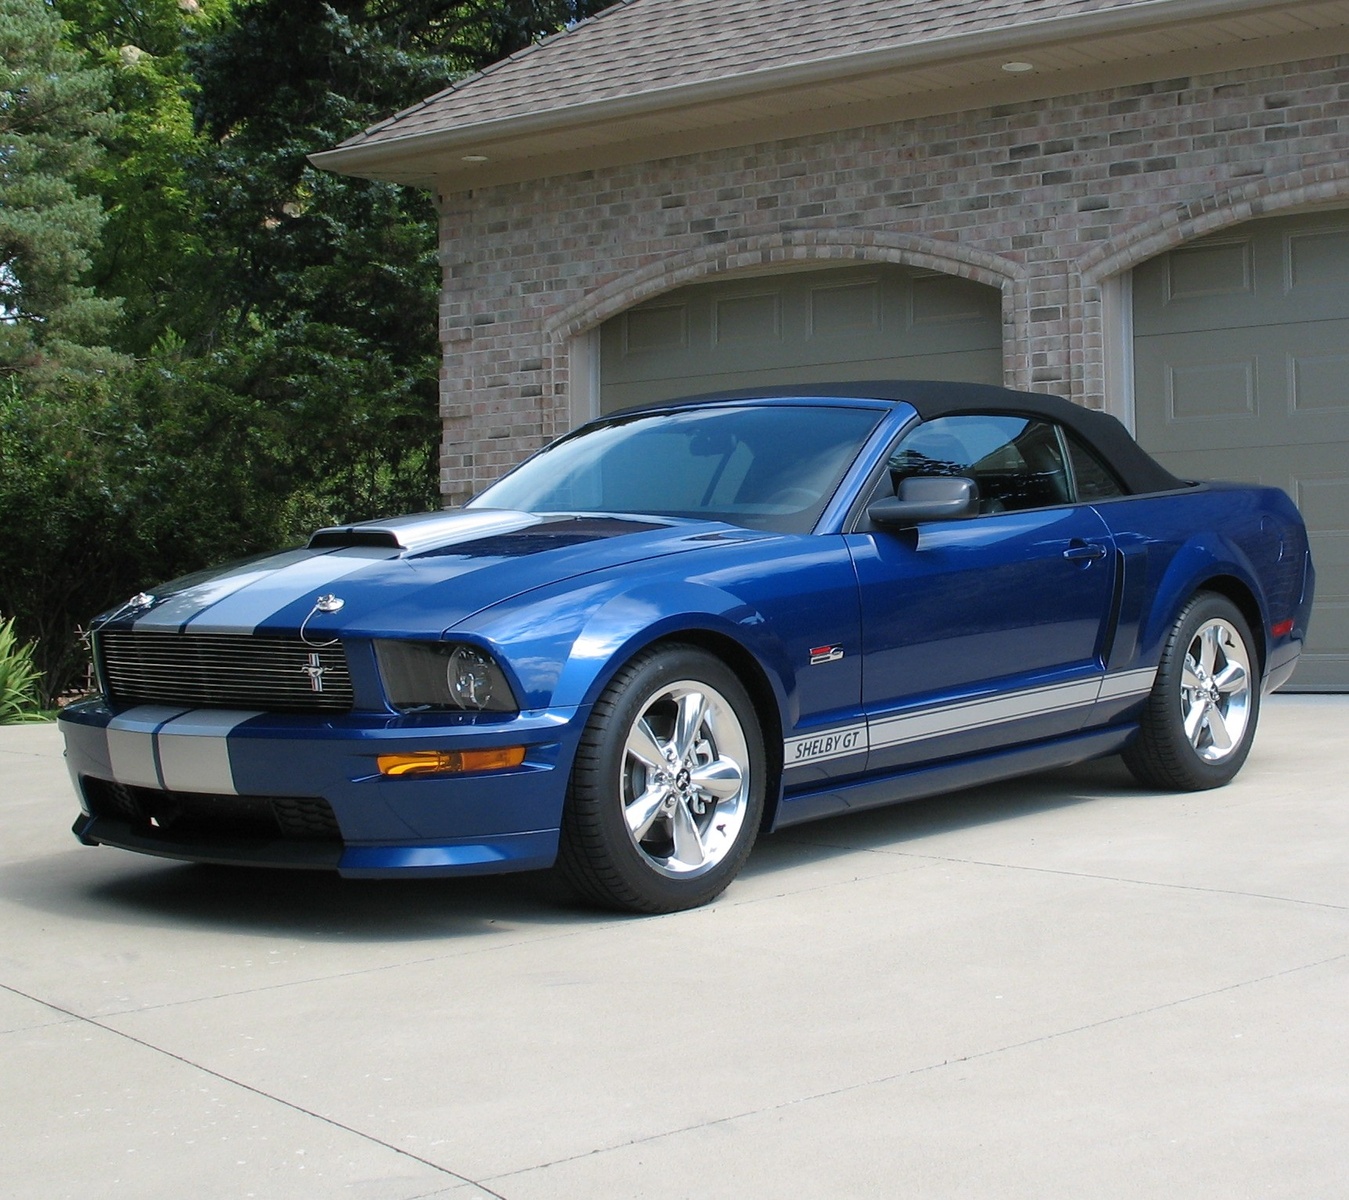 2008 Ford shelby gt500 specs #5